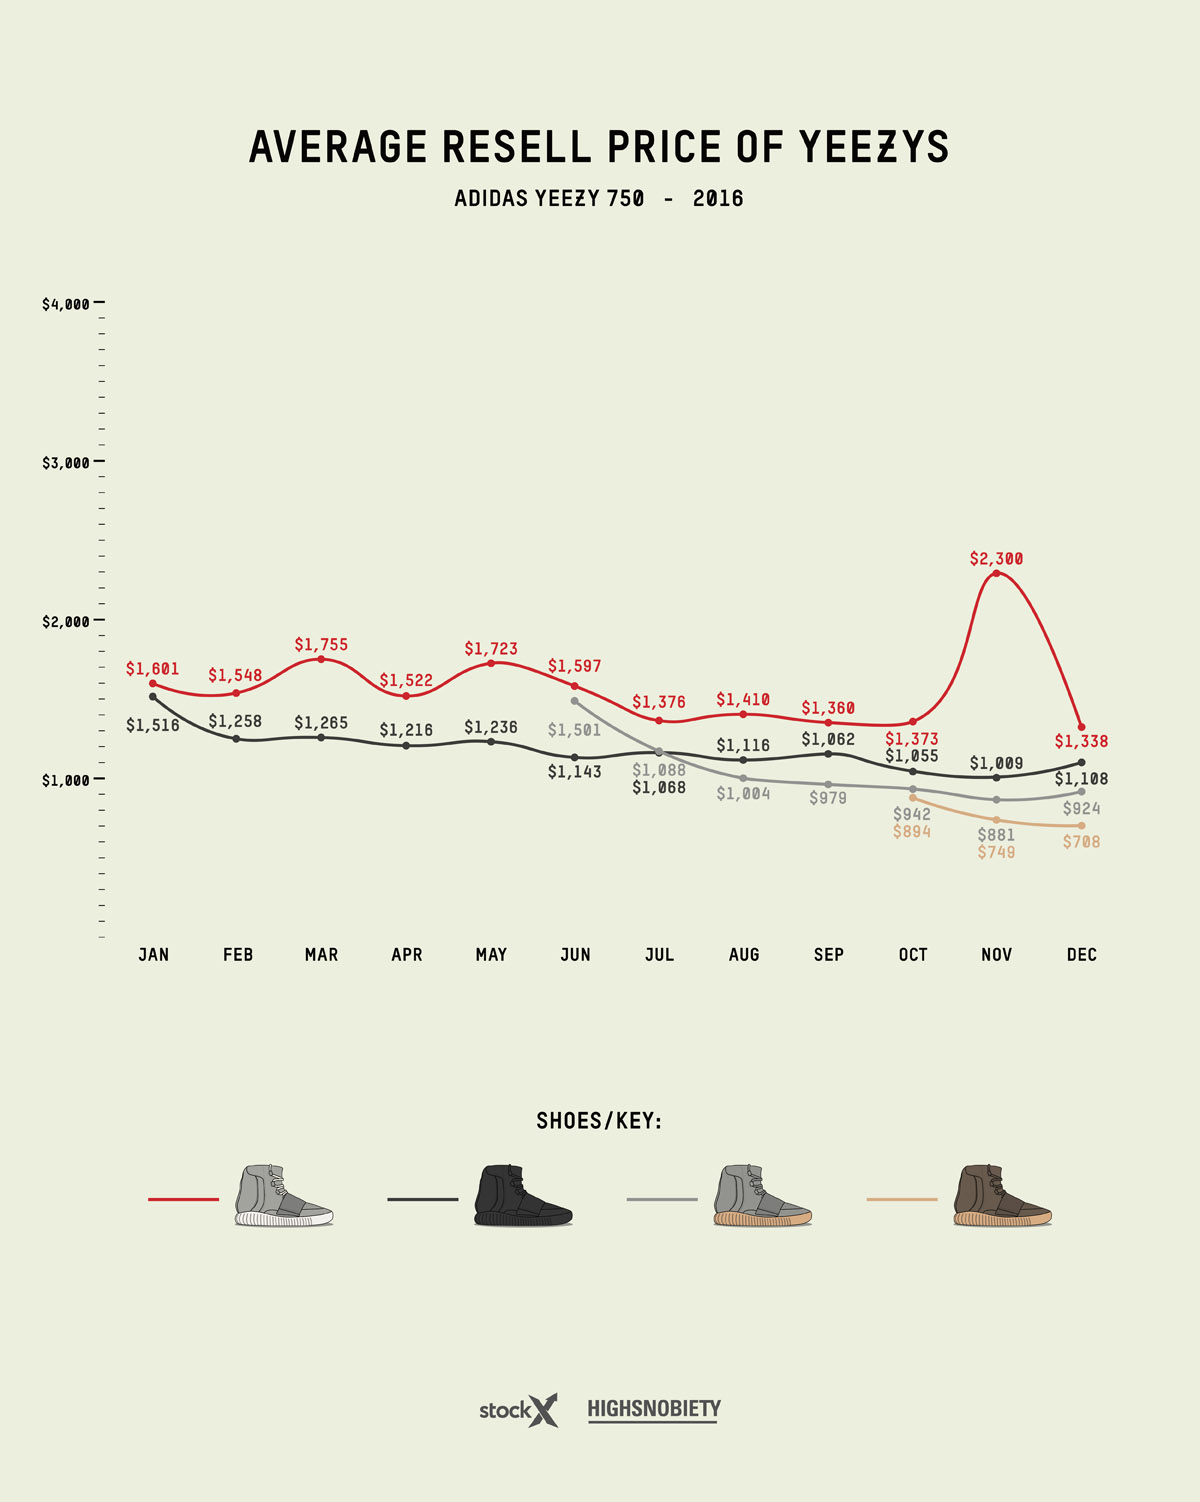 yeezy resell price guide 2019 update adidas Originals YEEZY Boost kanye west